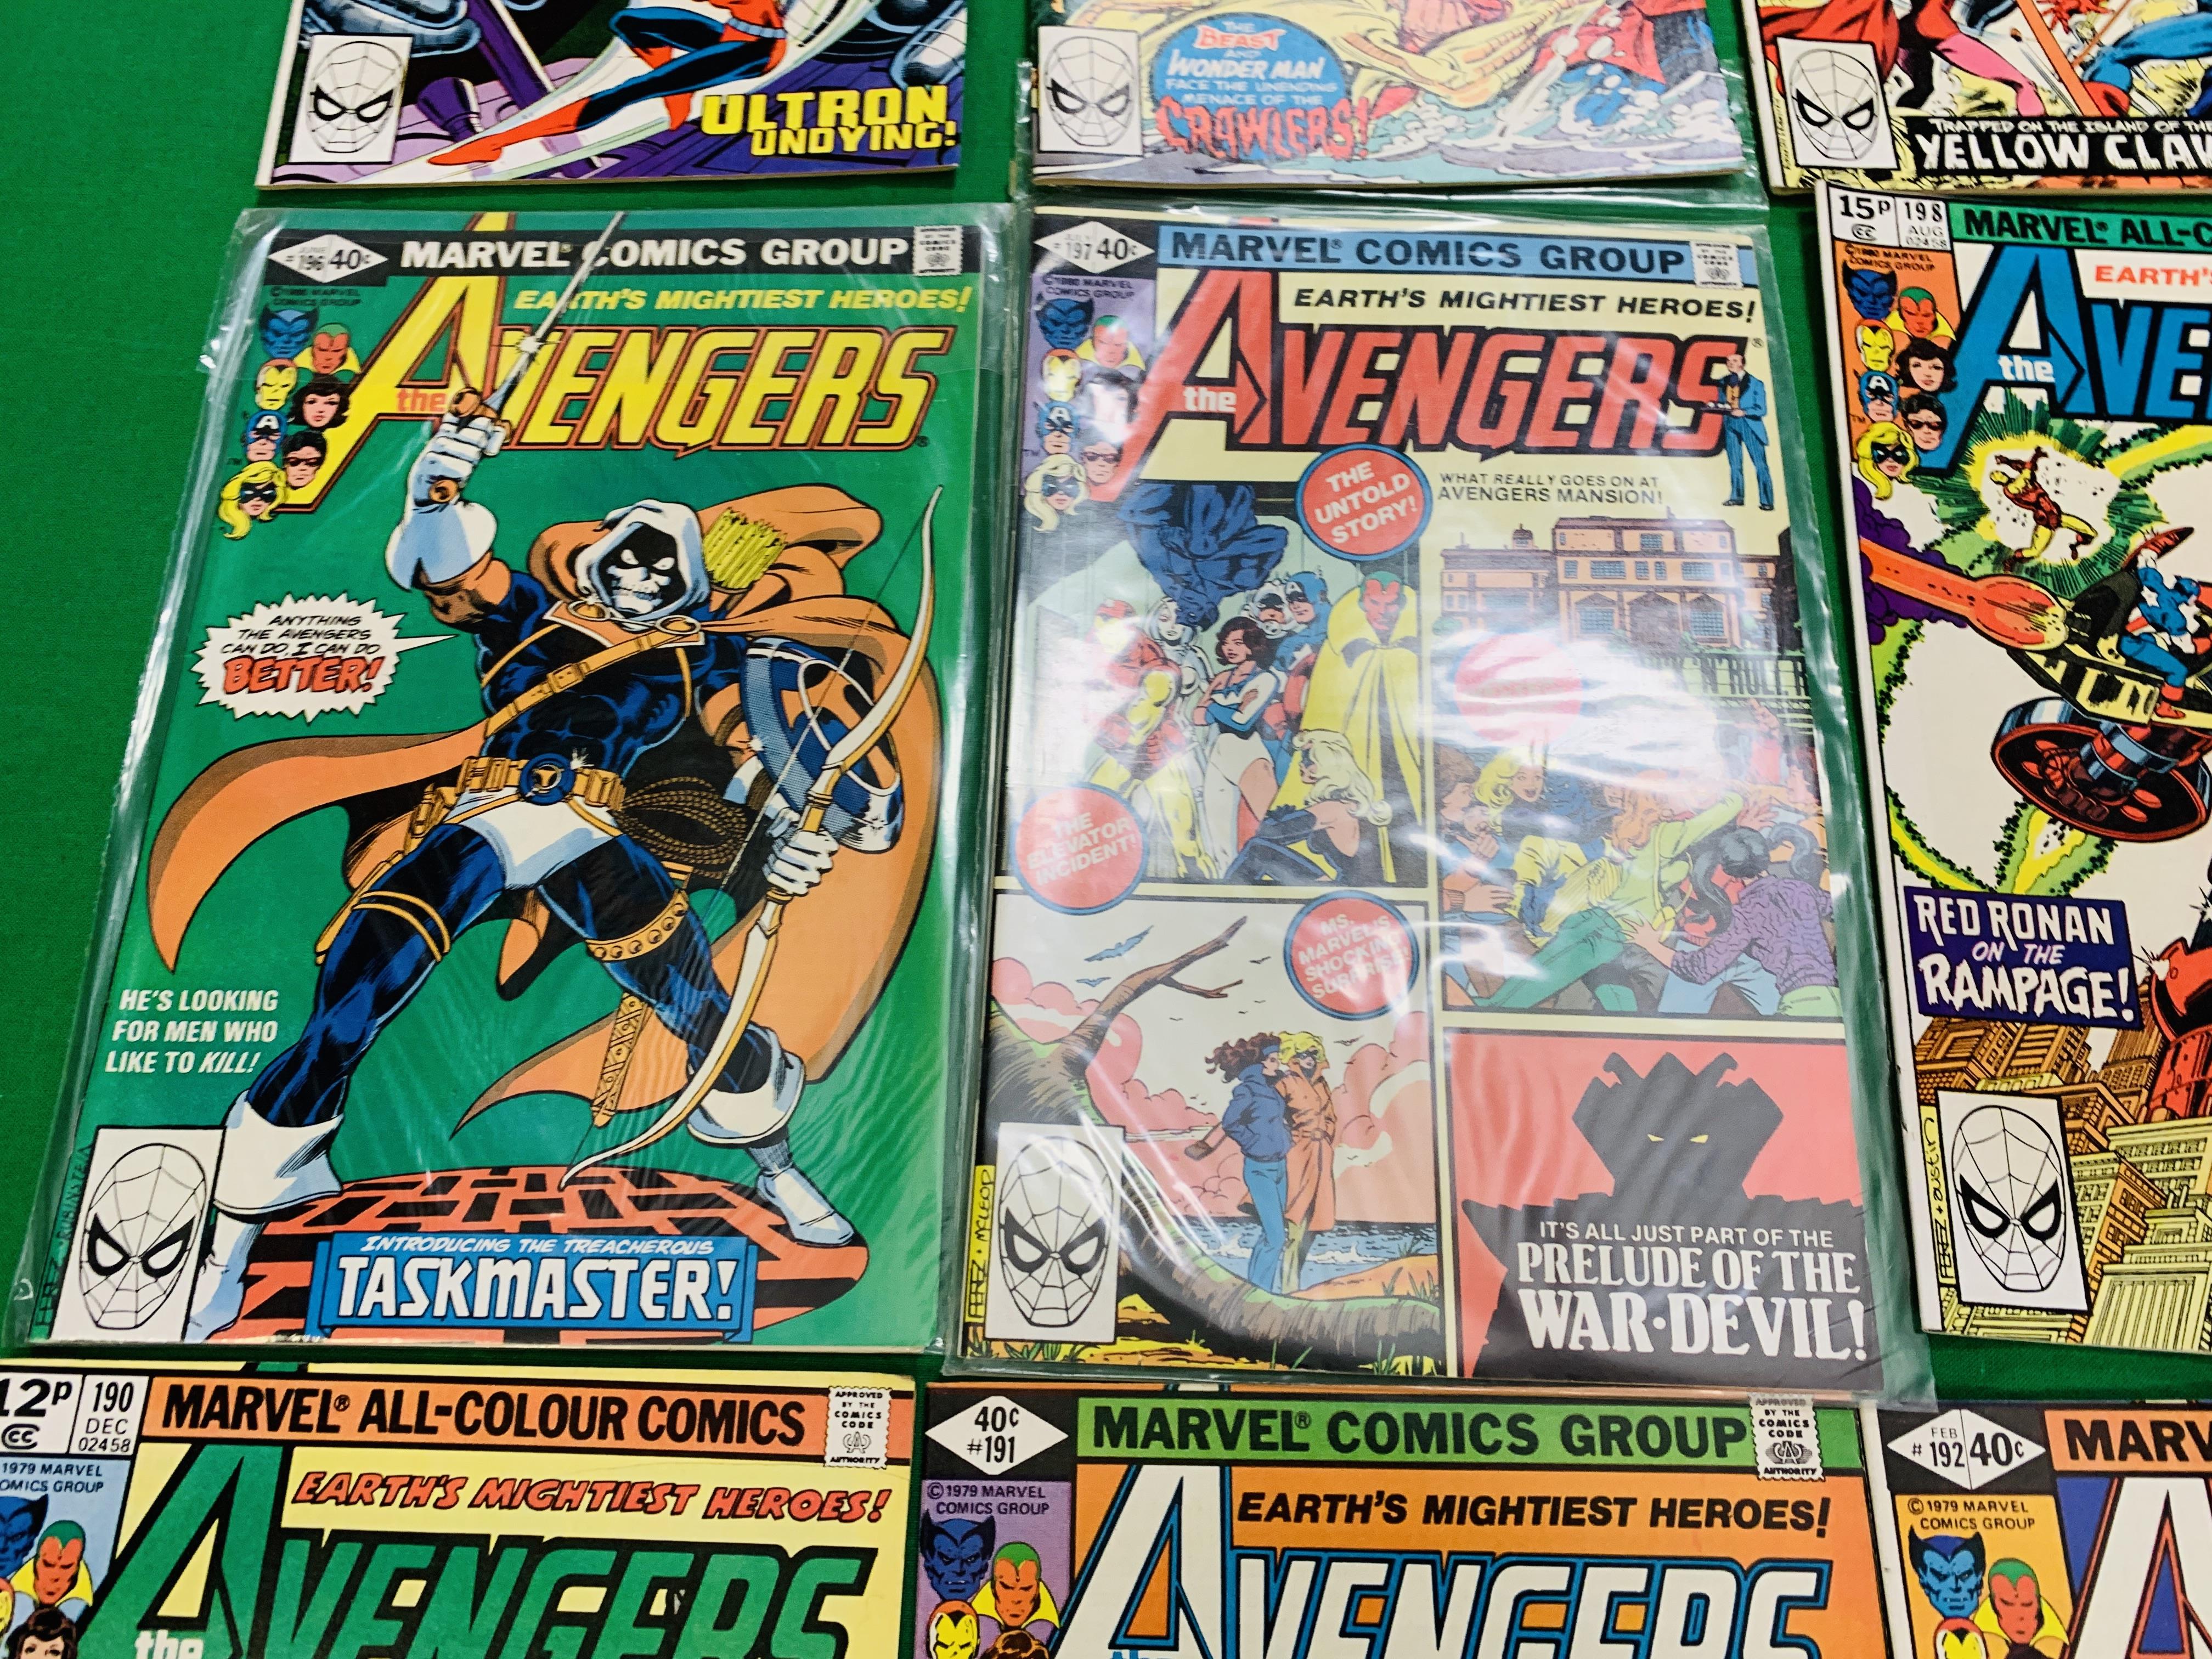 MARVEL COMICS THE AVENGERS NO. 101 - 299, MISSING ISSUES 103 AND 110. - Image 71 of 130